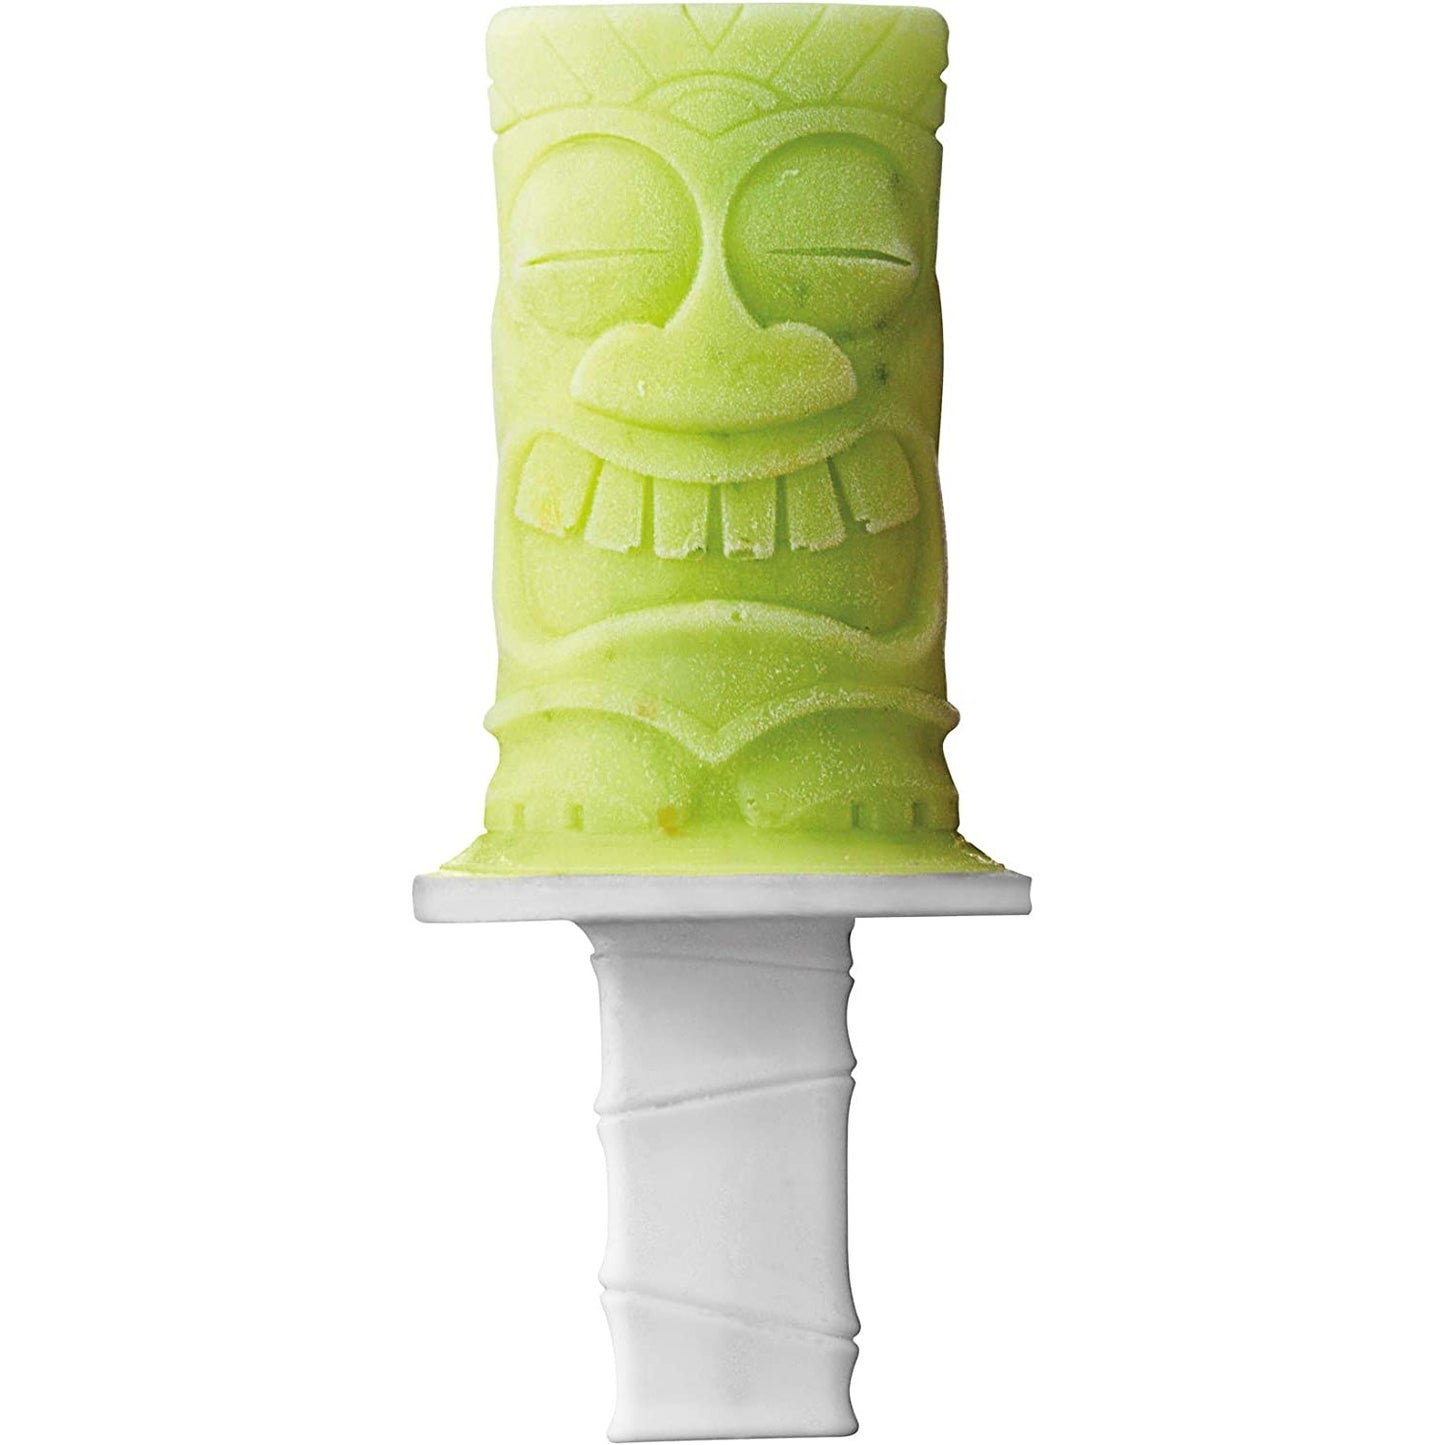 A green colored Tiki ice pop on a stick.